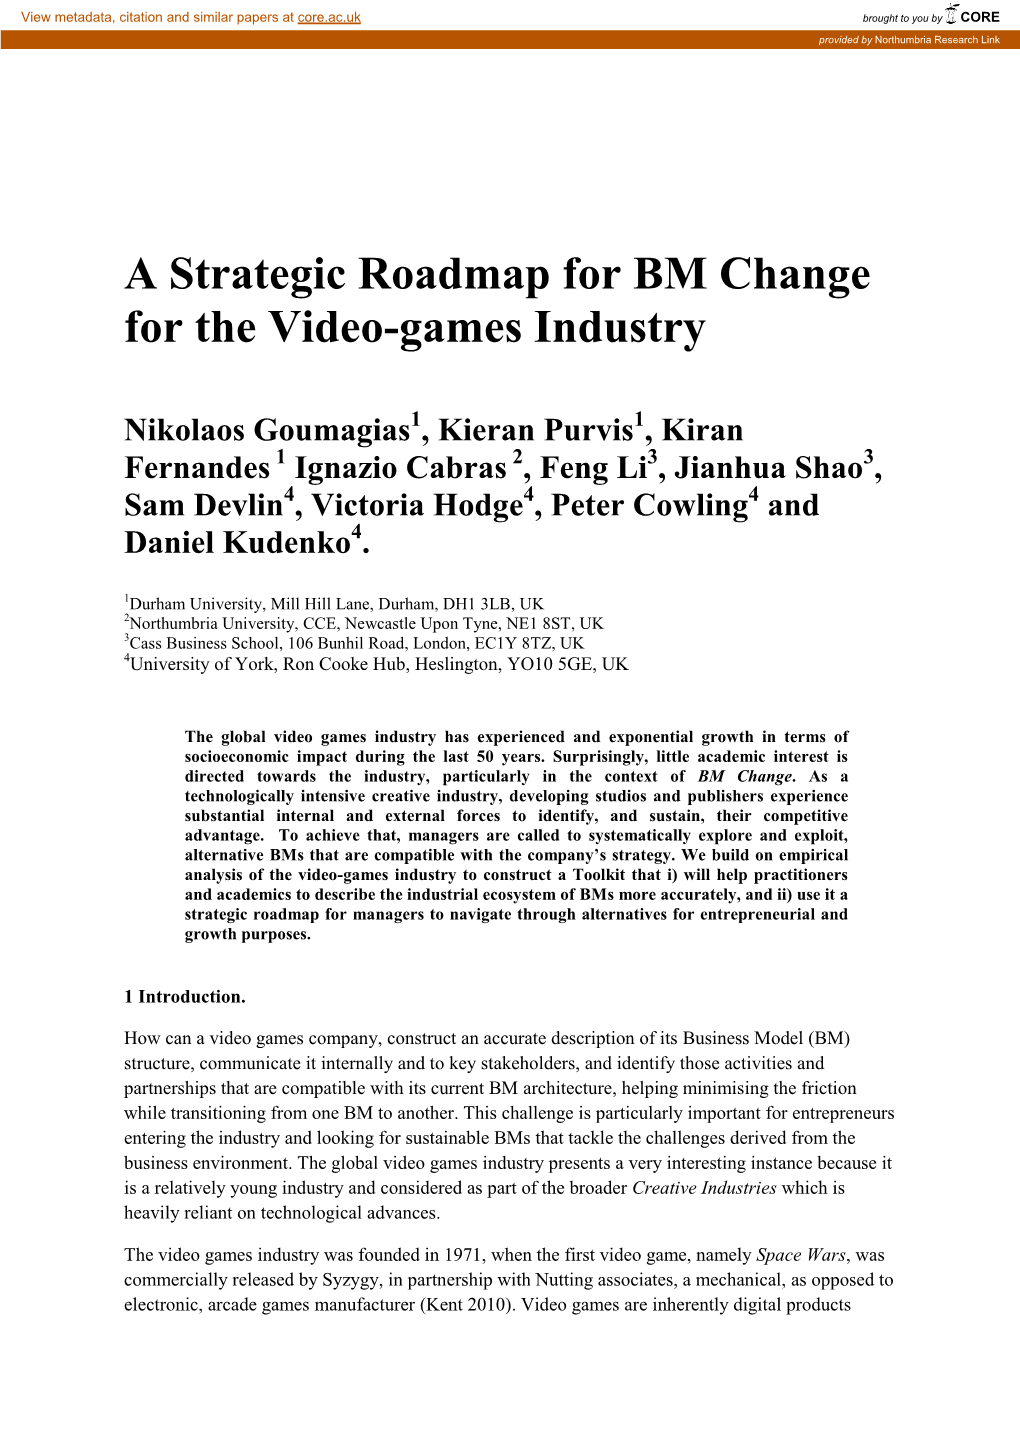 A Strategic Roadmap for BM Change for the Video-Games Industry